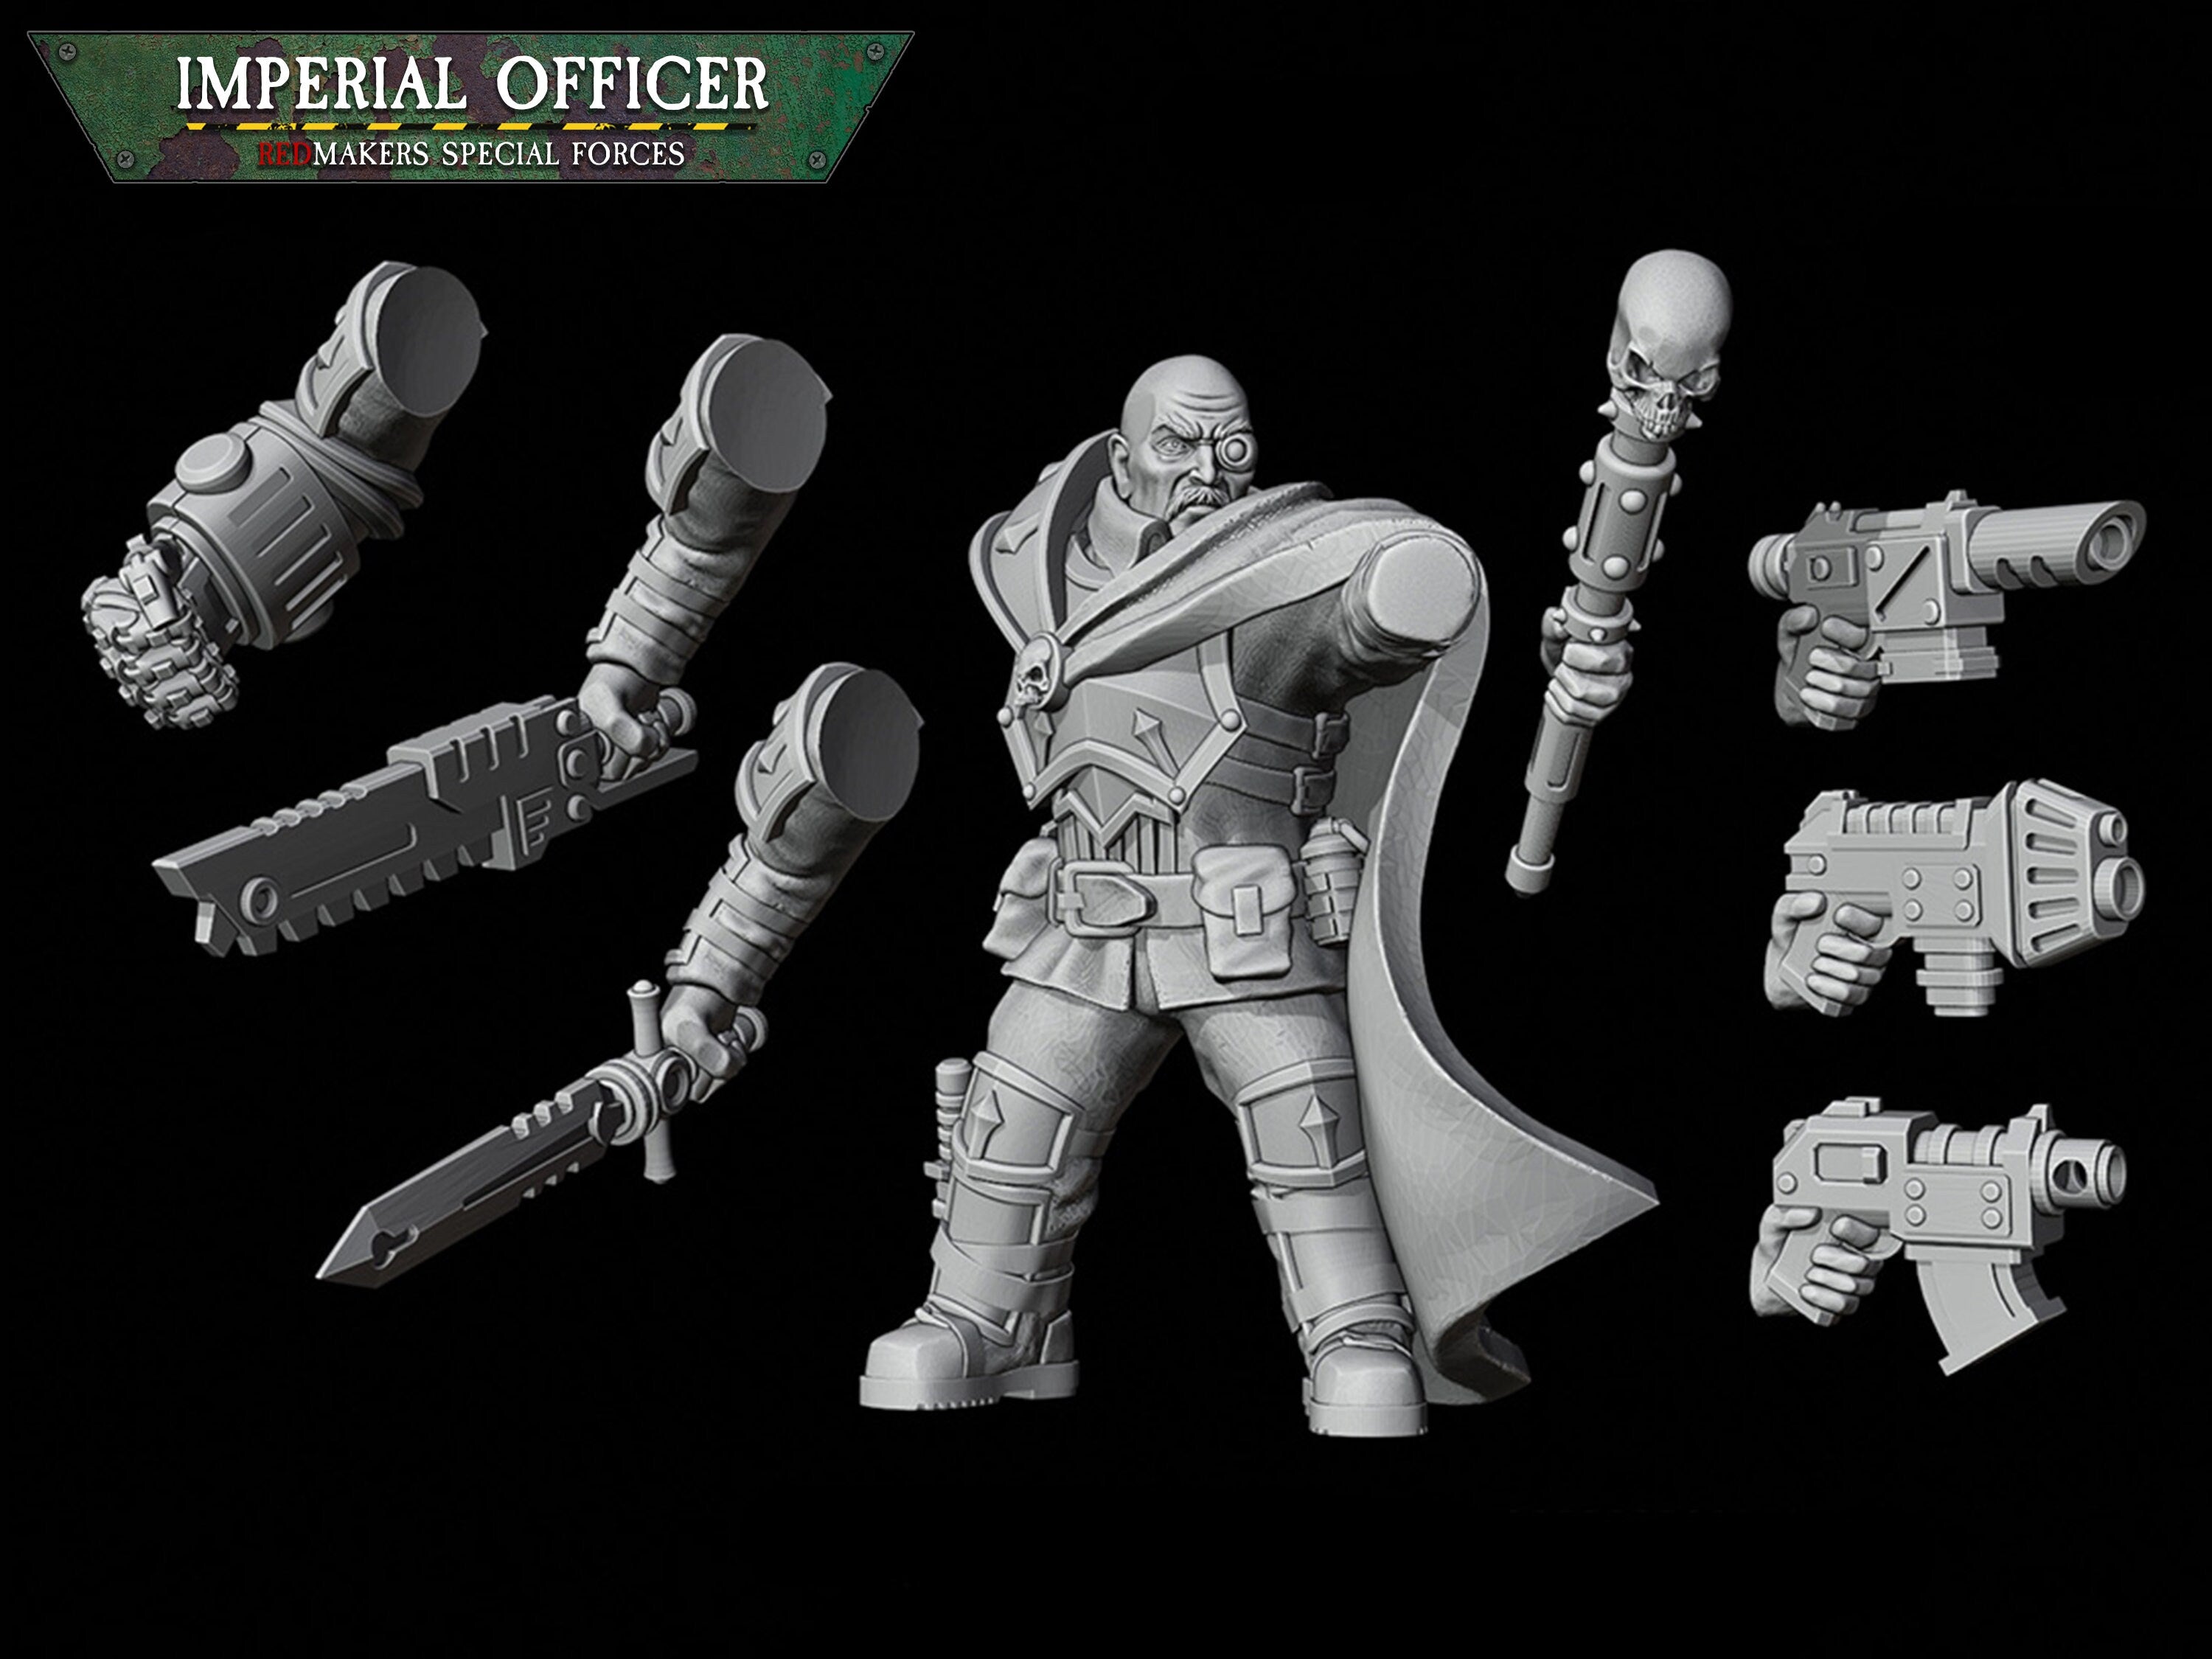 Special Forces: Imperial Officer | Krieg | Trench Korps | Steel Legion | Redmakers